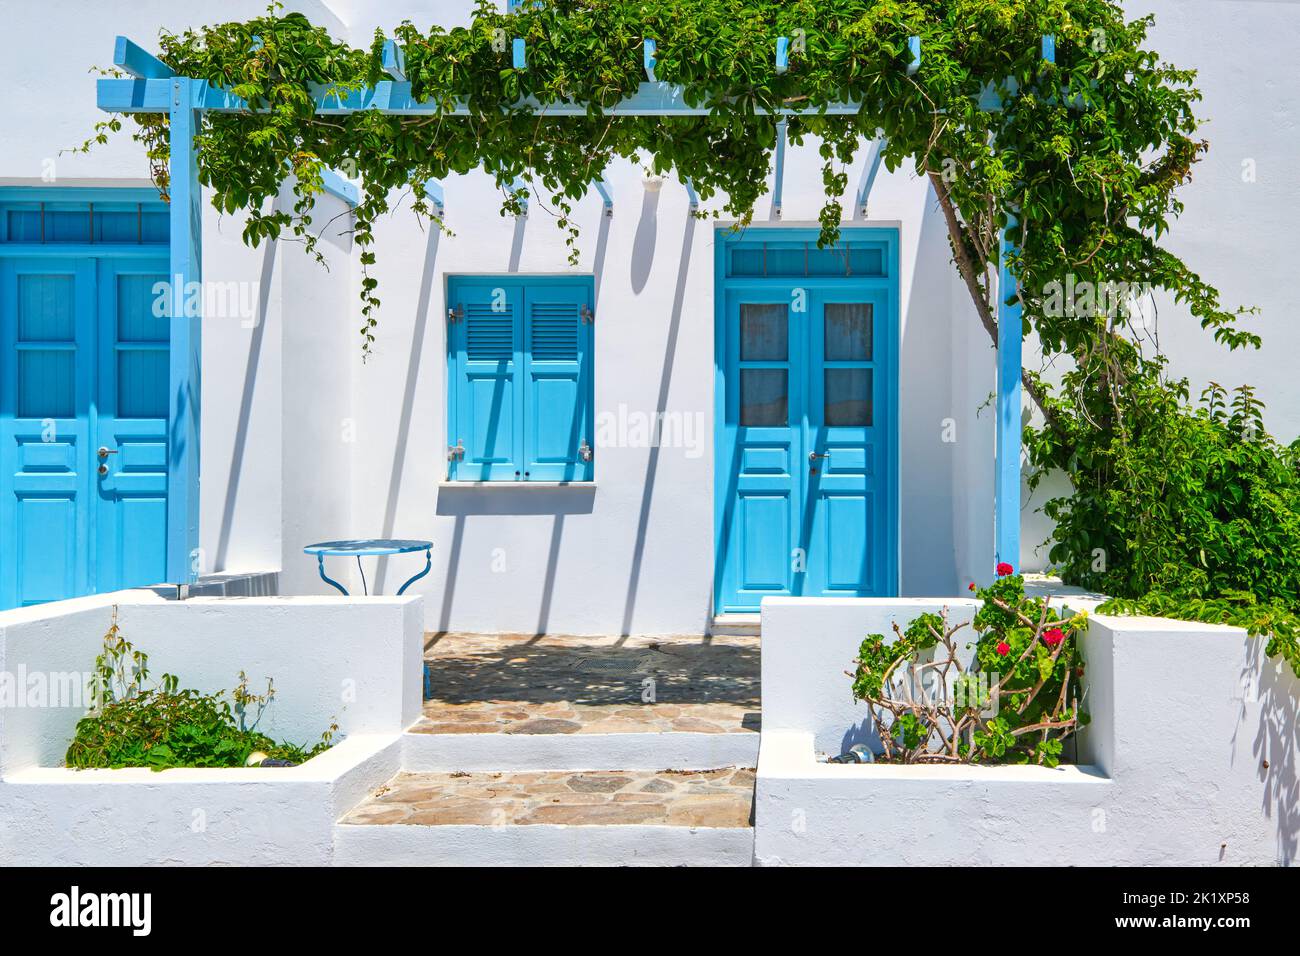 Traditional blue doors and windows, whitewashed walls of Greek houses. Midday summer sunshine, blue table, pavement, vine, porch, Milos, Greece Stock Photo